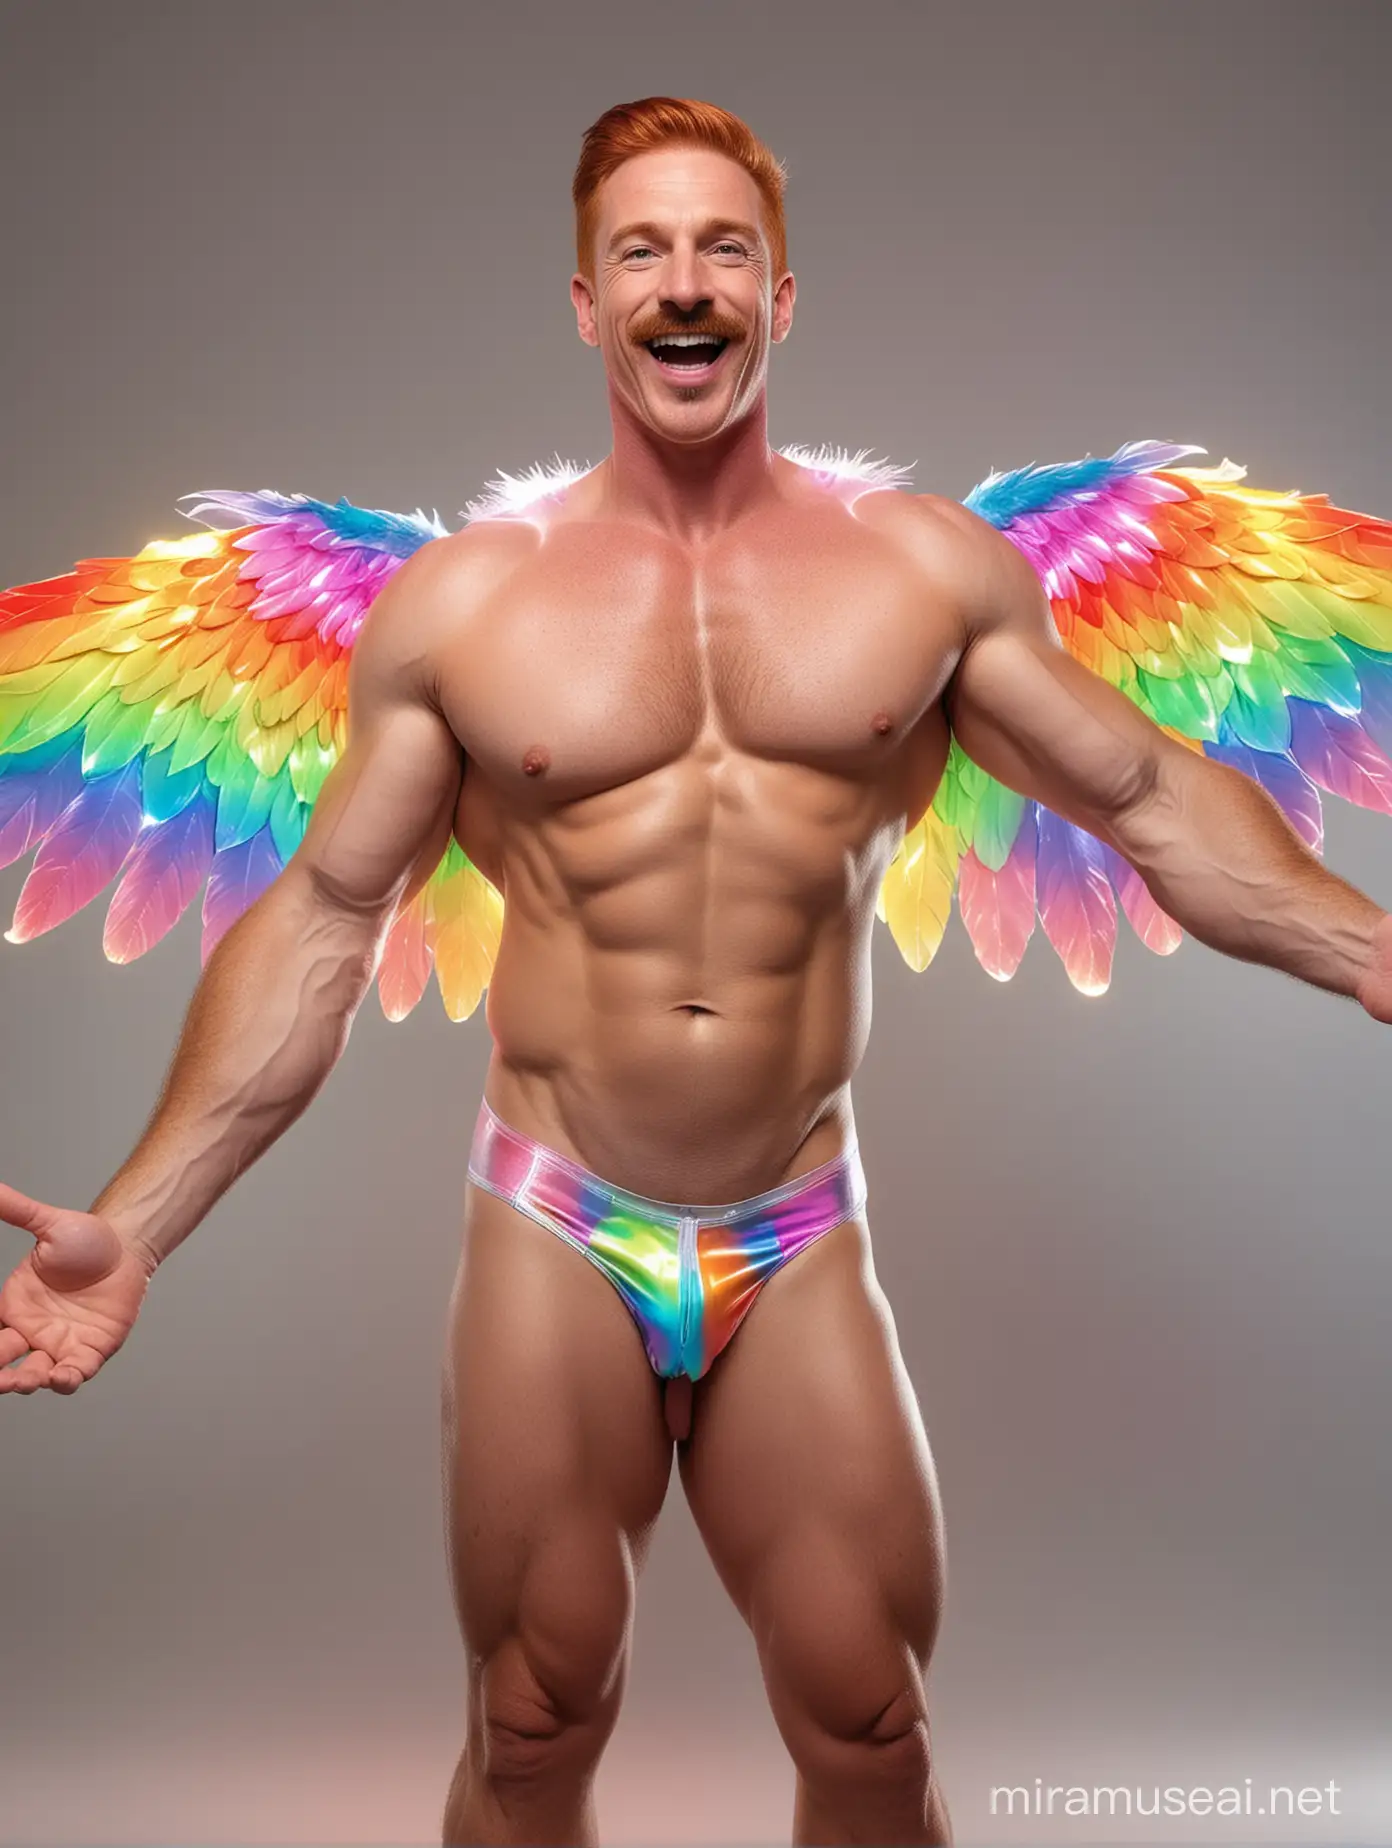 Topless 40s Ultra Chunky Bodybuilder moustache Redhead Daddy with Great Smile wearing Multi-Highlighter Bright Rainbow with white Coloured See Through Huge Eagle Wings Shoulder Jacket led lights Short shorts left arm up Flexing